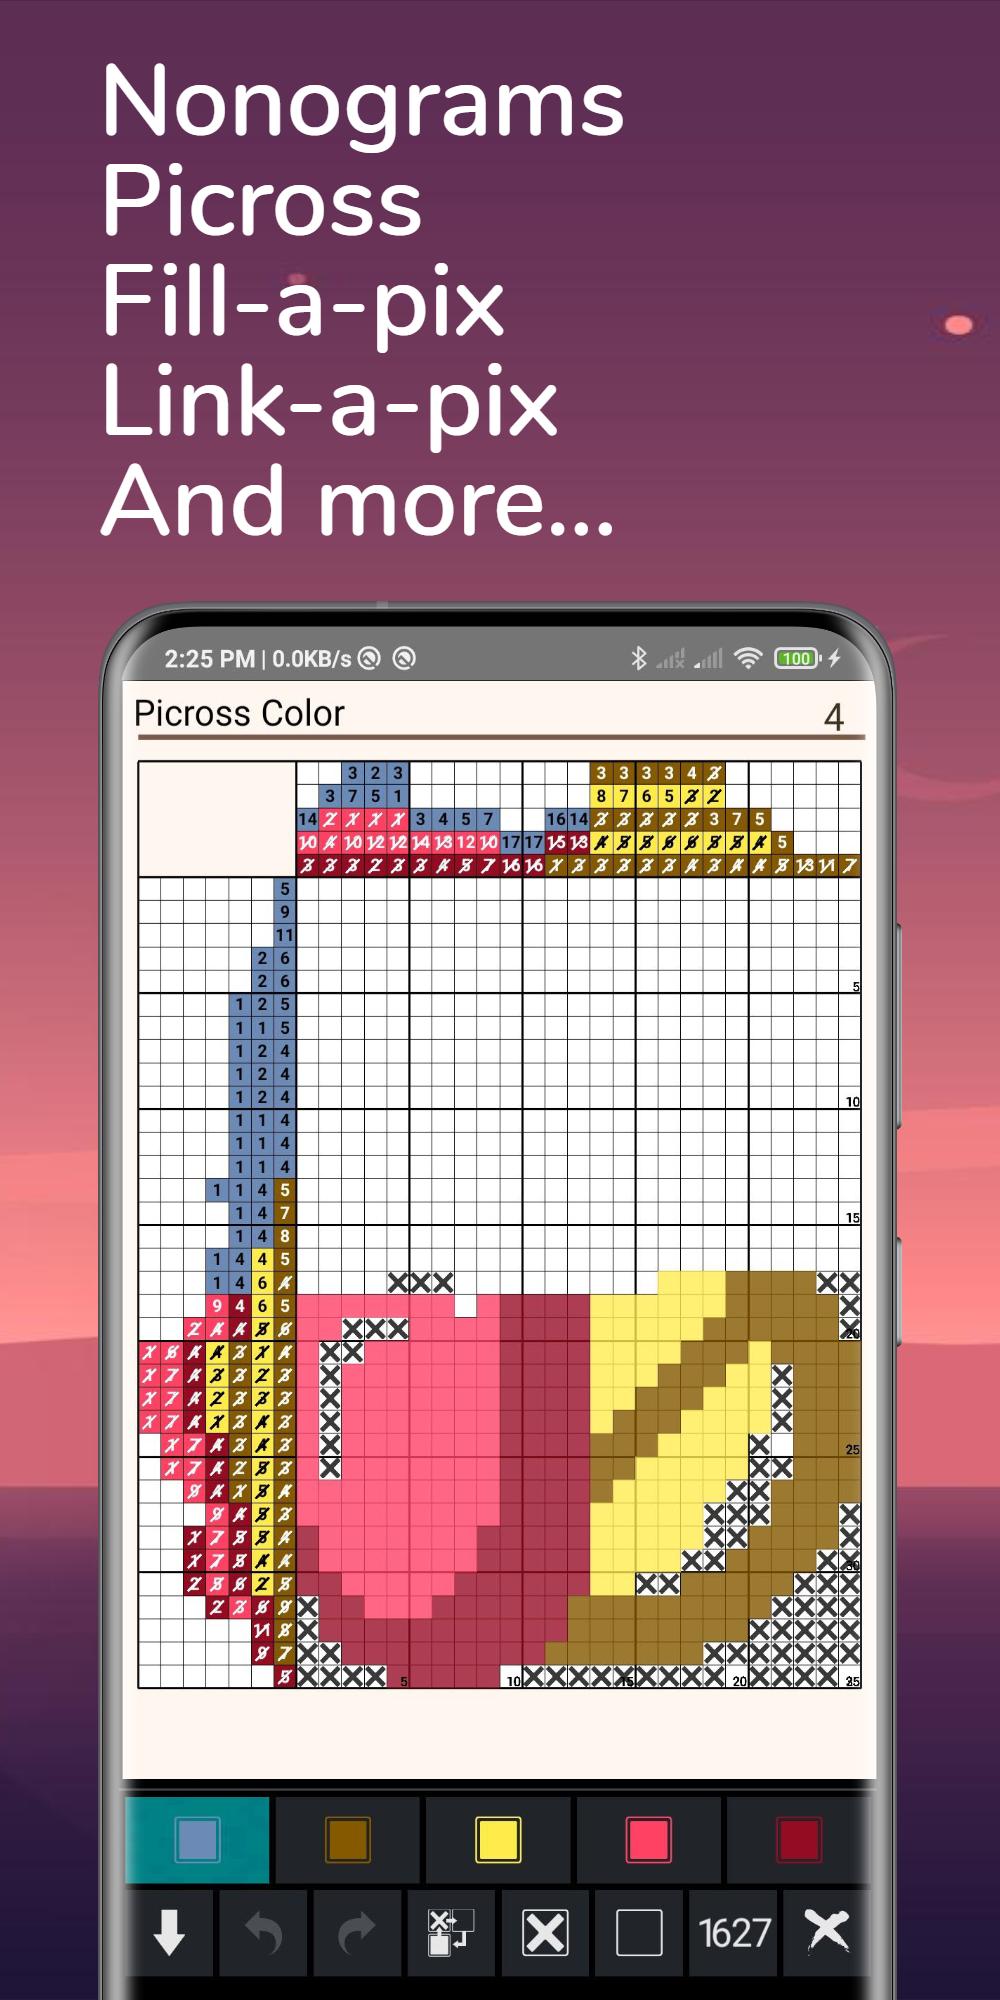 Daily Logic Puzzles & Number Games 1.9.4 Screenshot 9